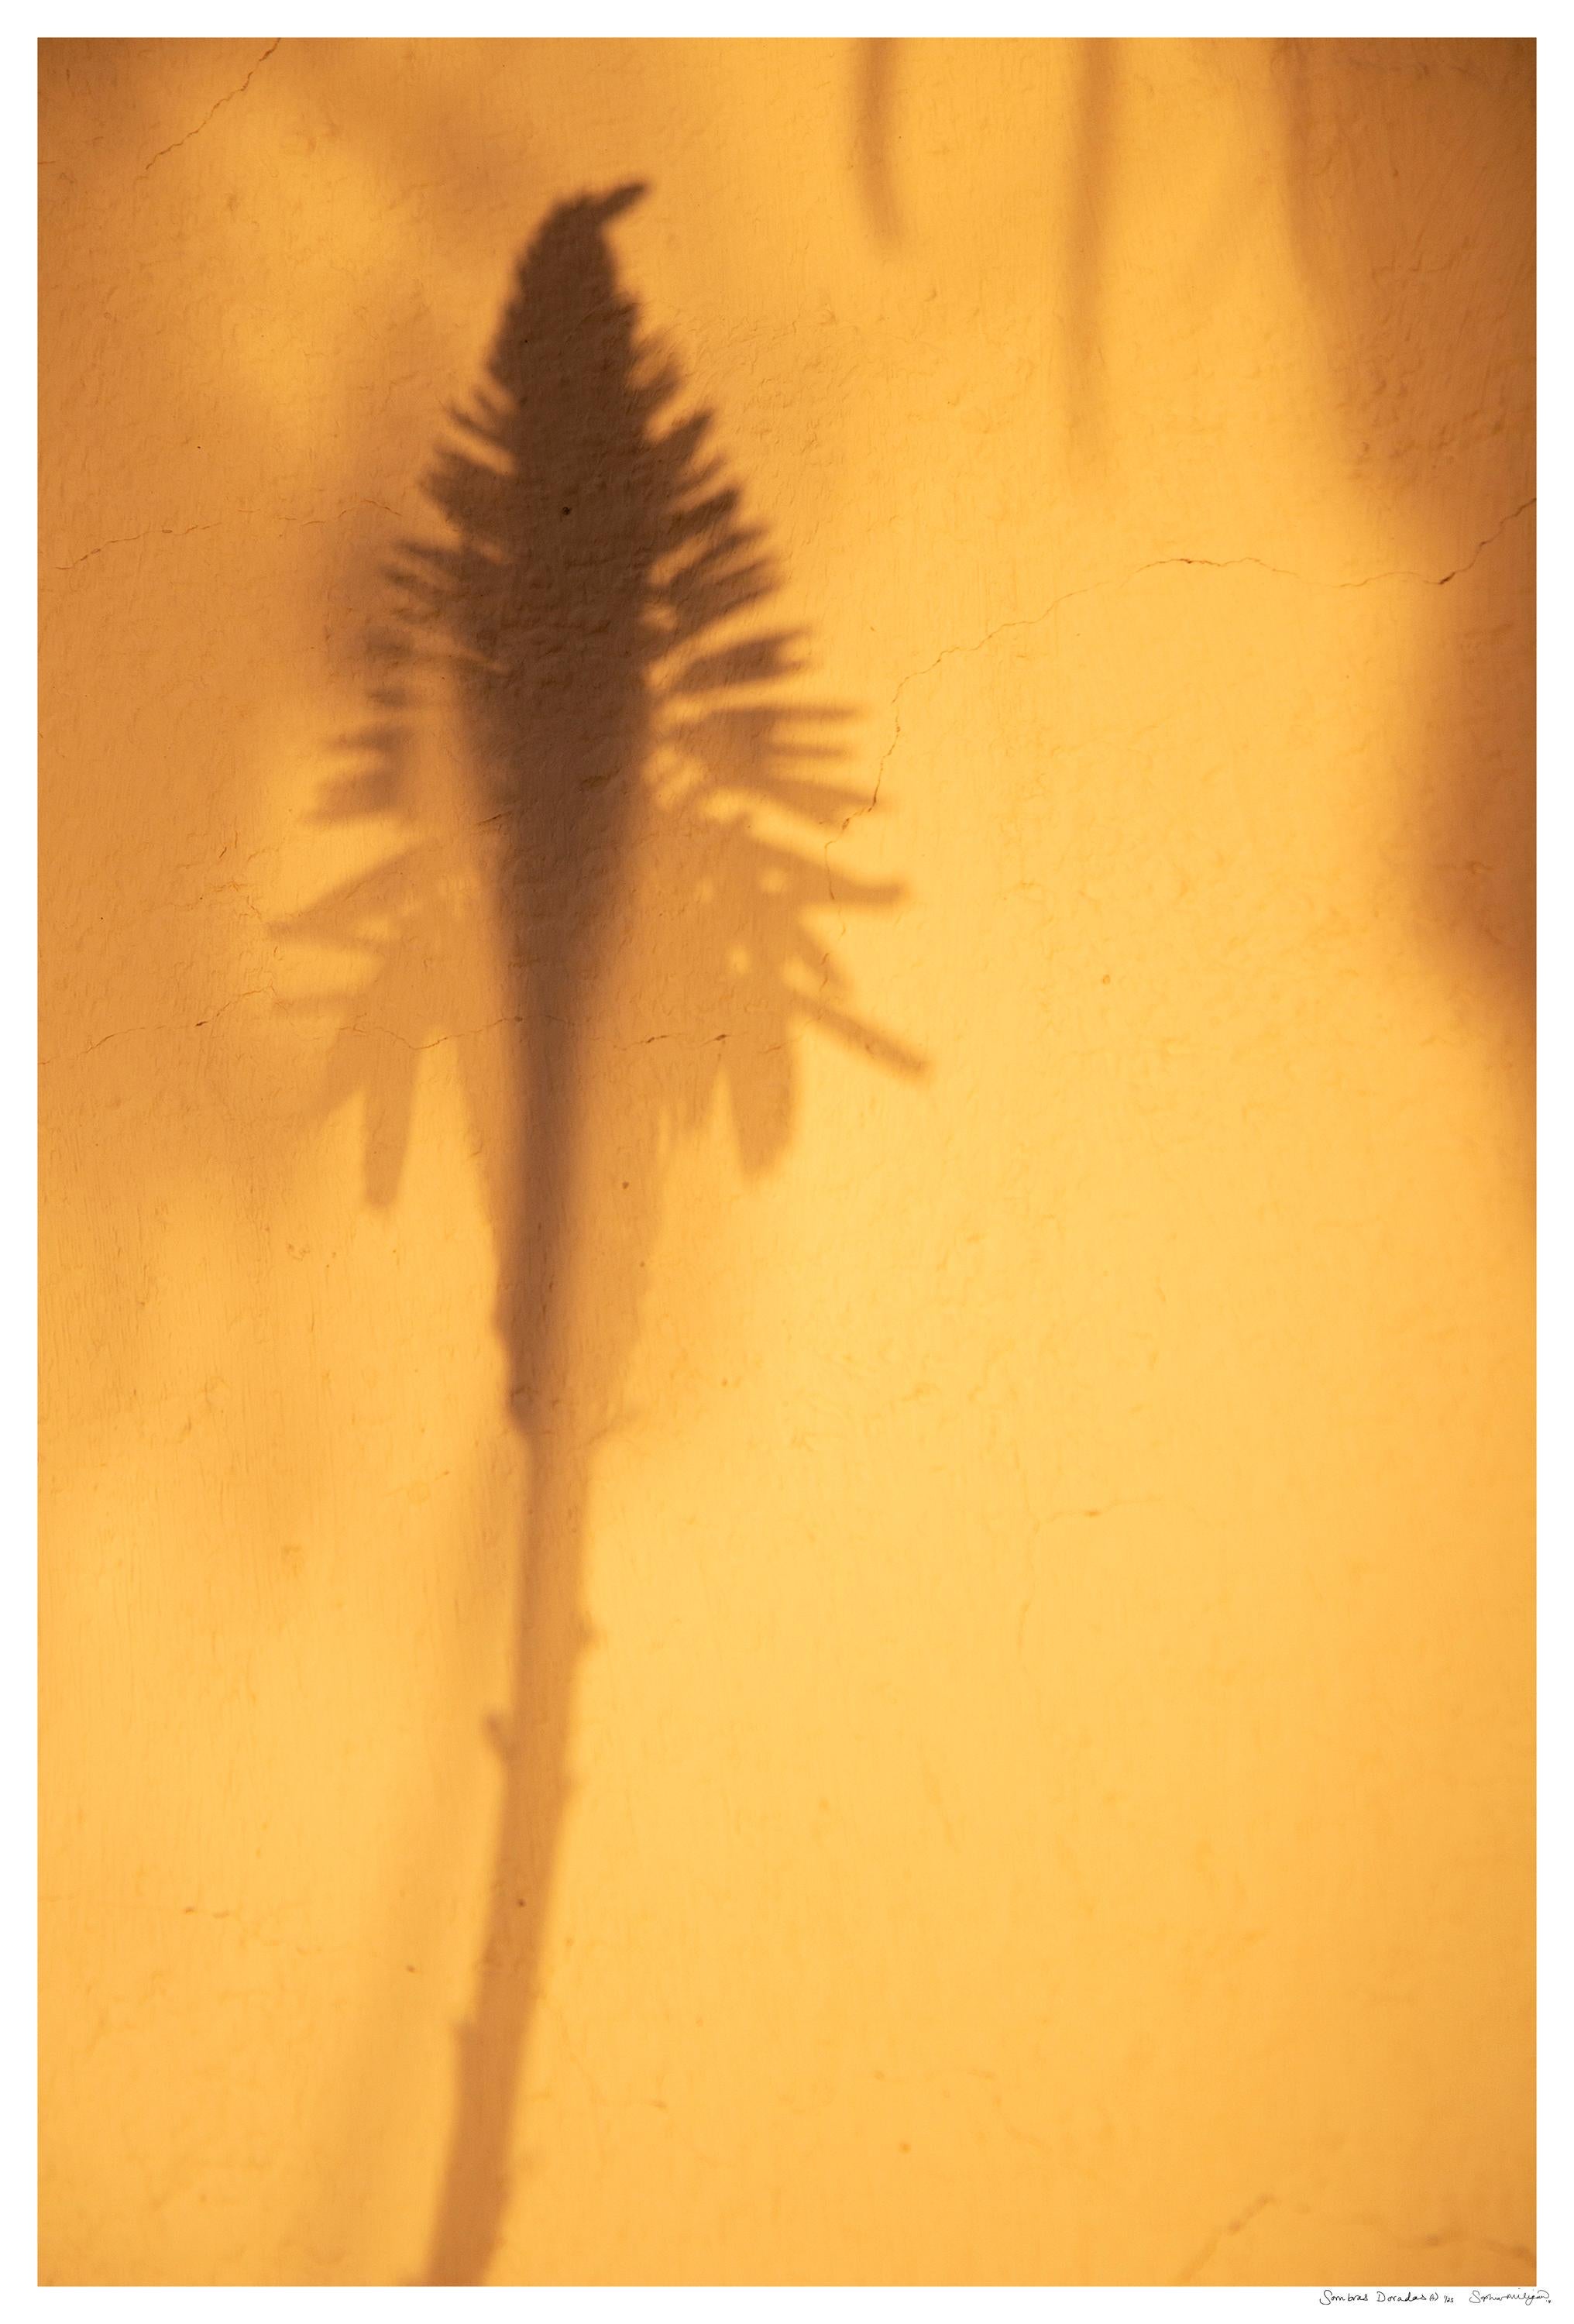 'Sombras Doradas (4)'
Limited edition archival photograph. Unframed, hand signed and numbered
_________________
Shadows painted on the finca wall: low December sun, golden, luminous, casting soft silhouettes through the aperture of the Eucalyptus